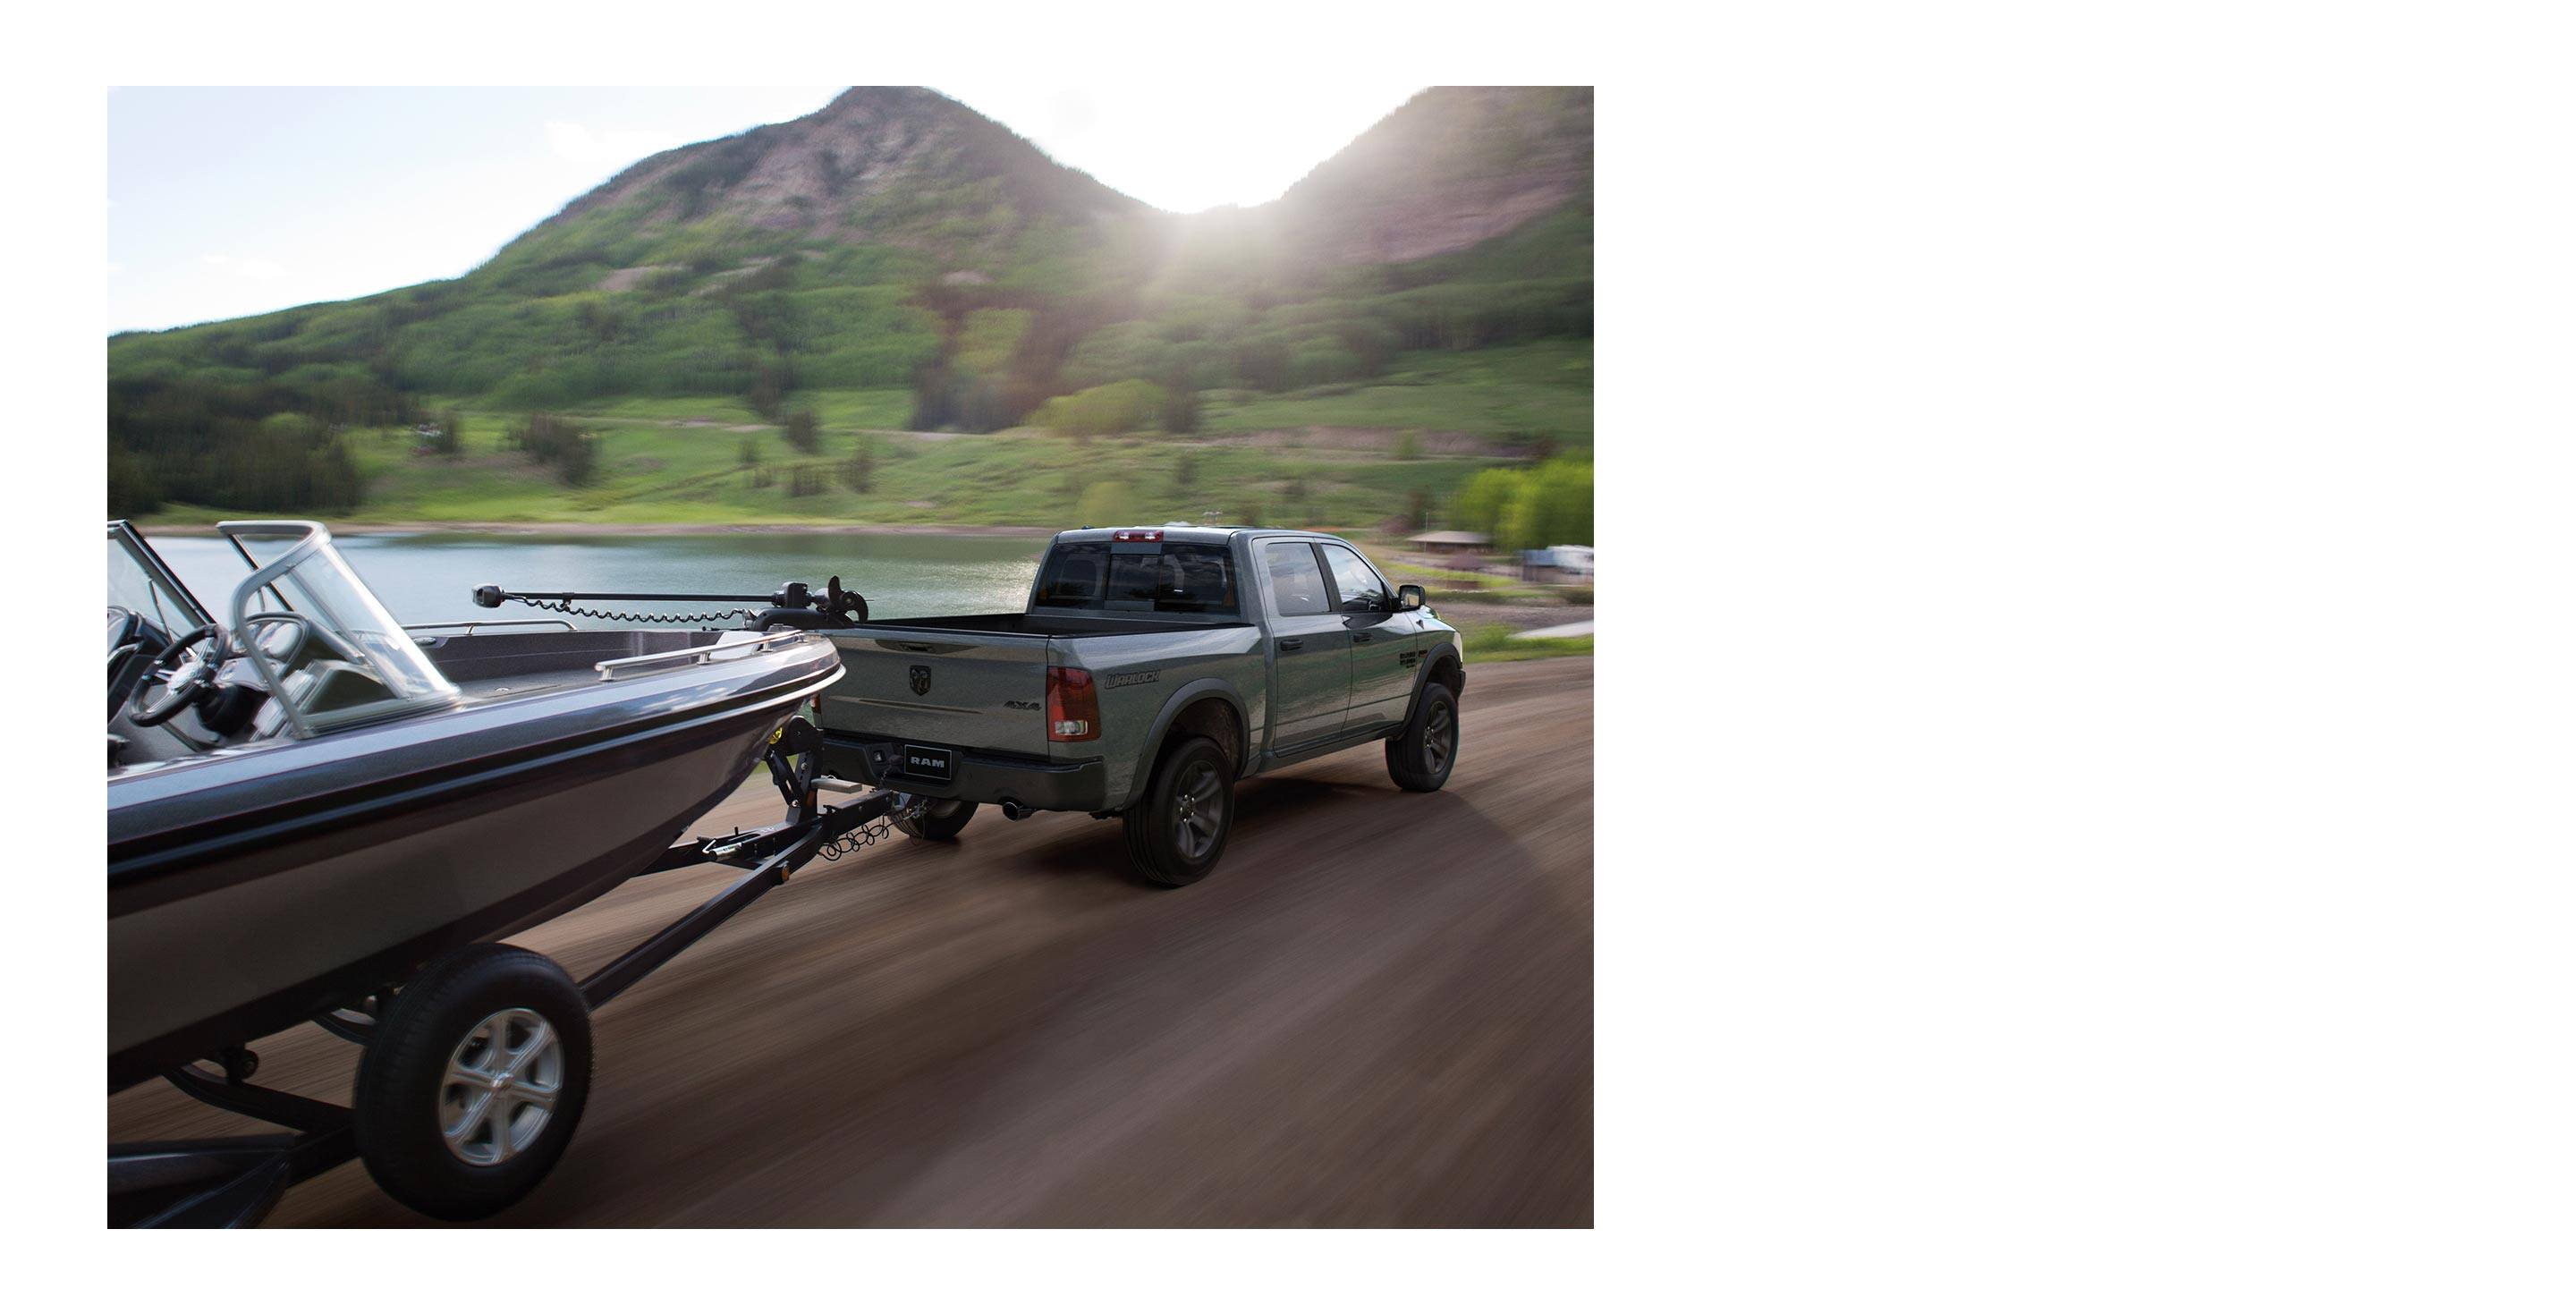 The 2022 Ram 1500 Classic towing a motorboat with the scenery blurred to indicate its speed.